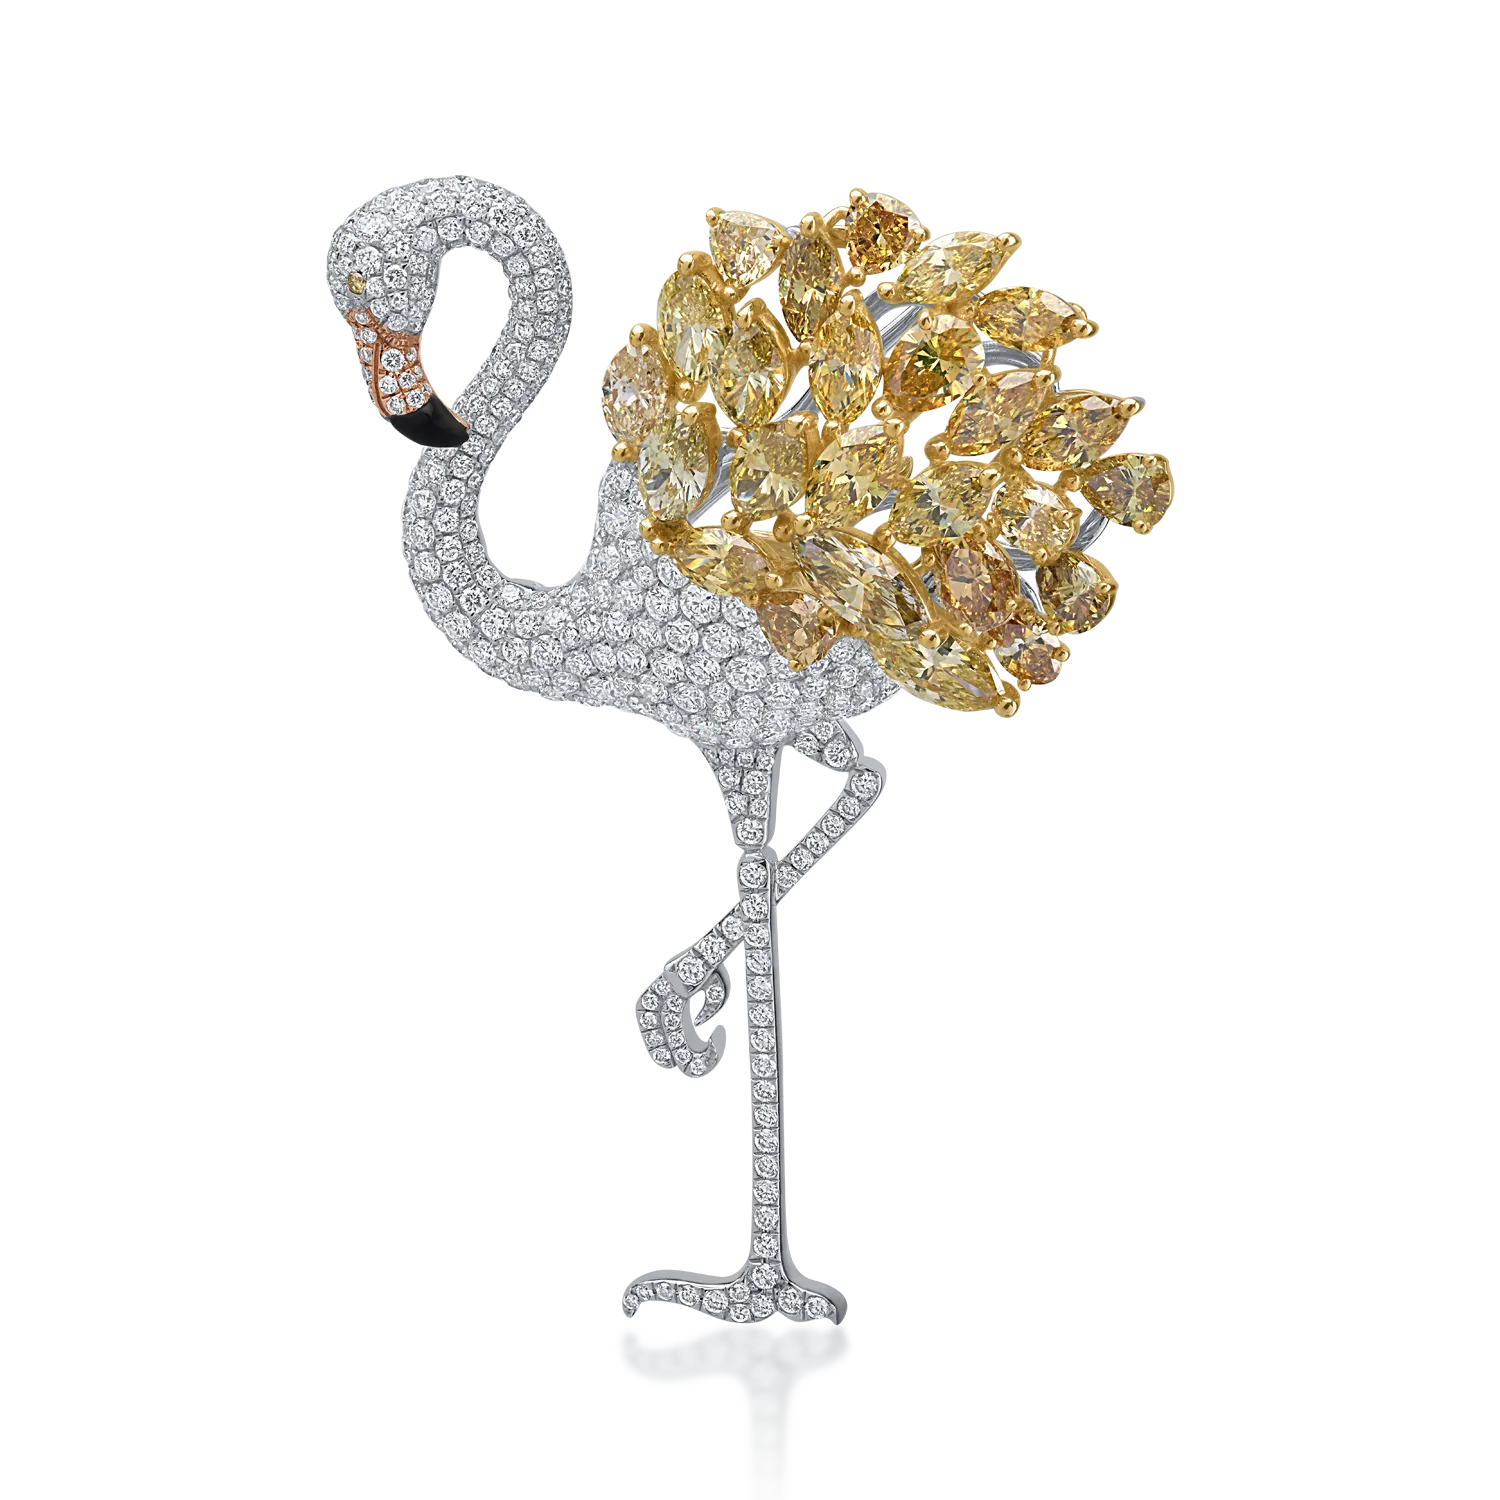 White gold brooch with 9.35ct diamonds and 0.08ct onyx